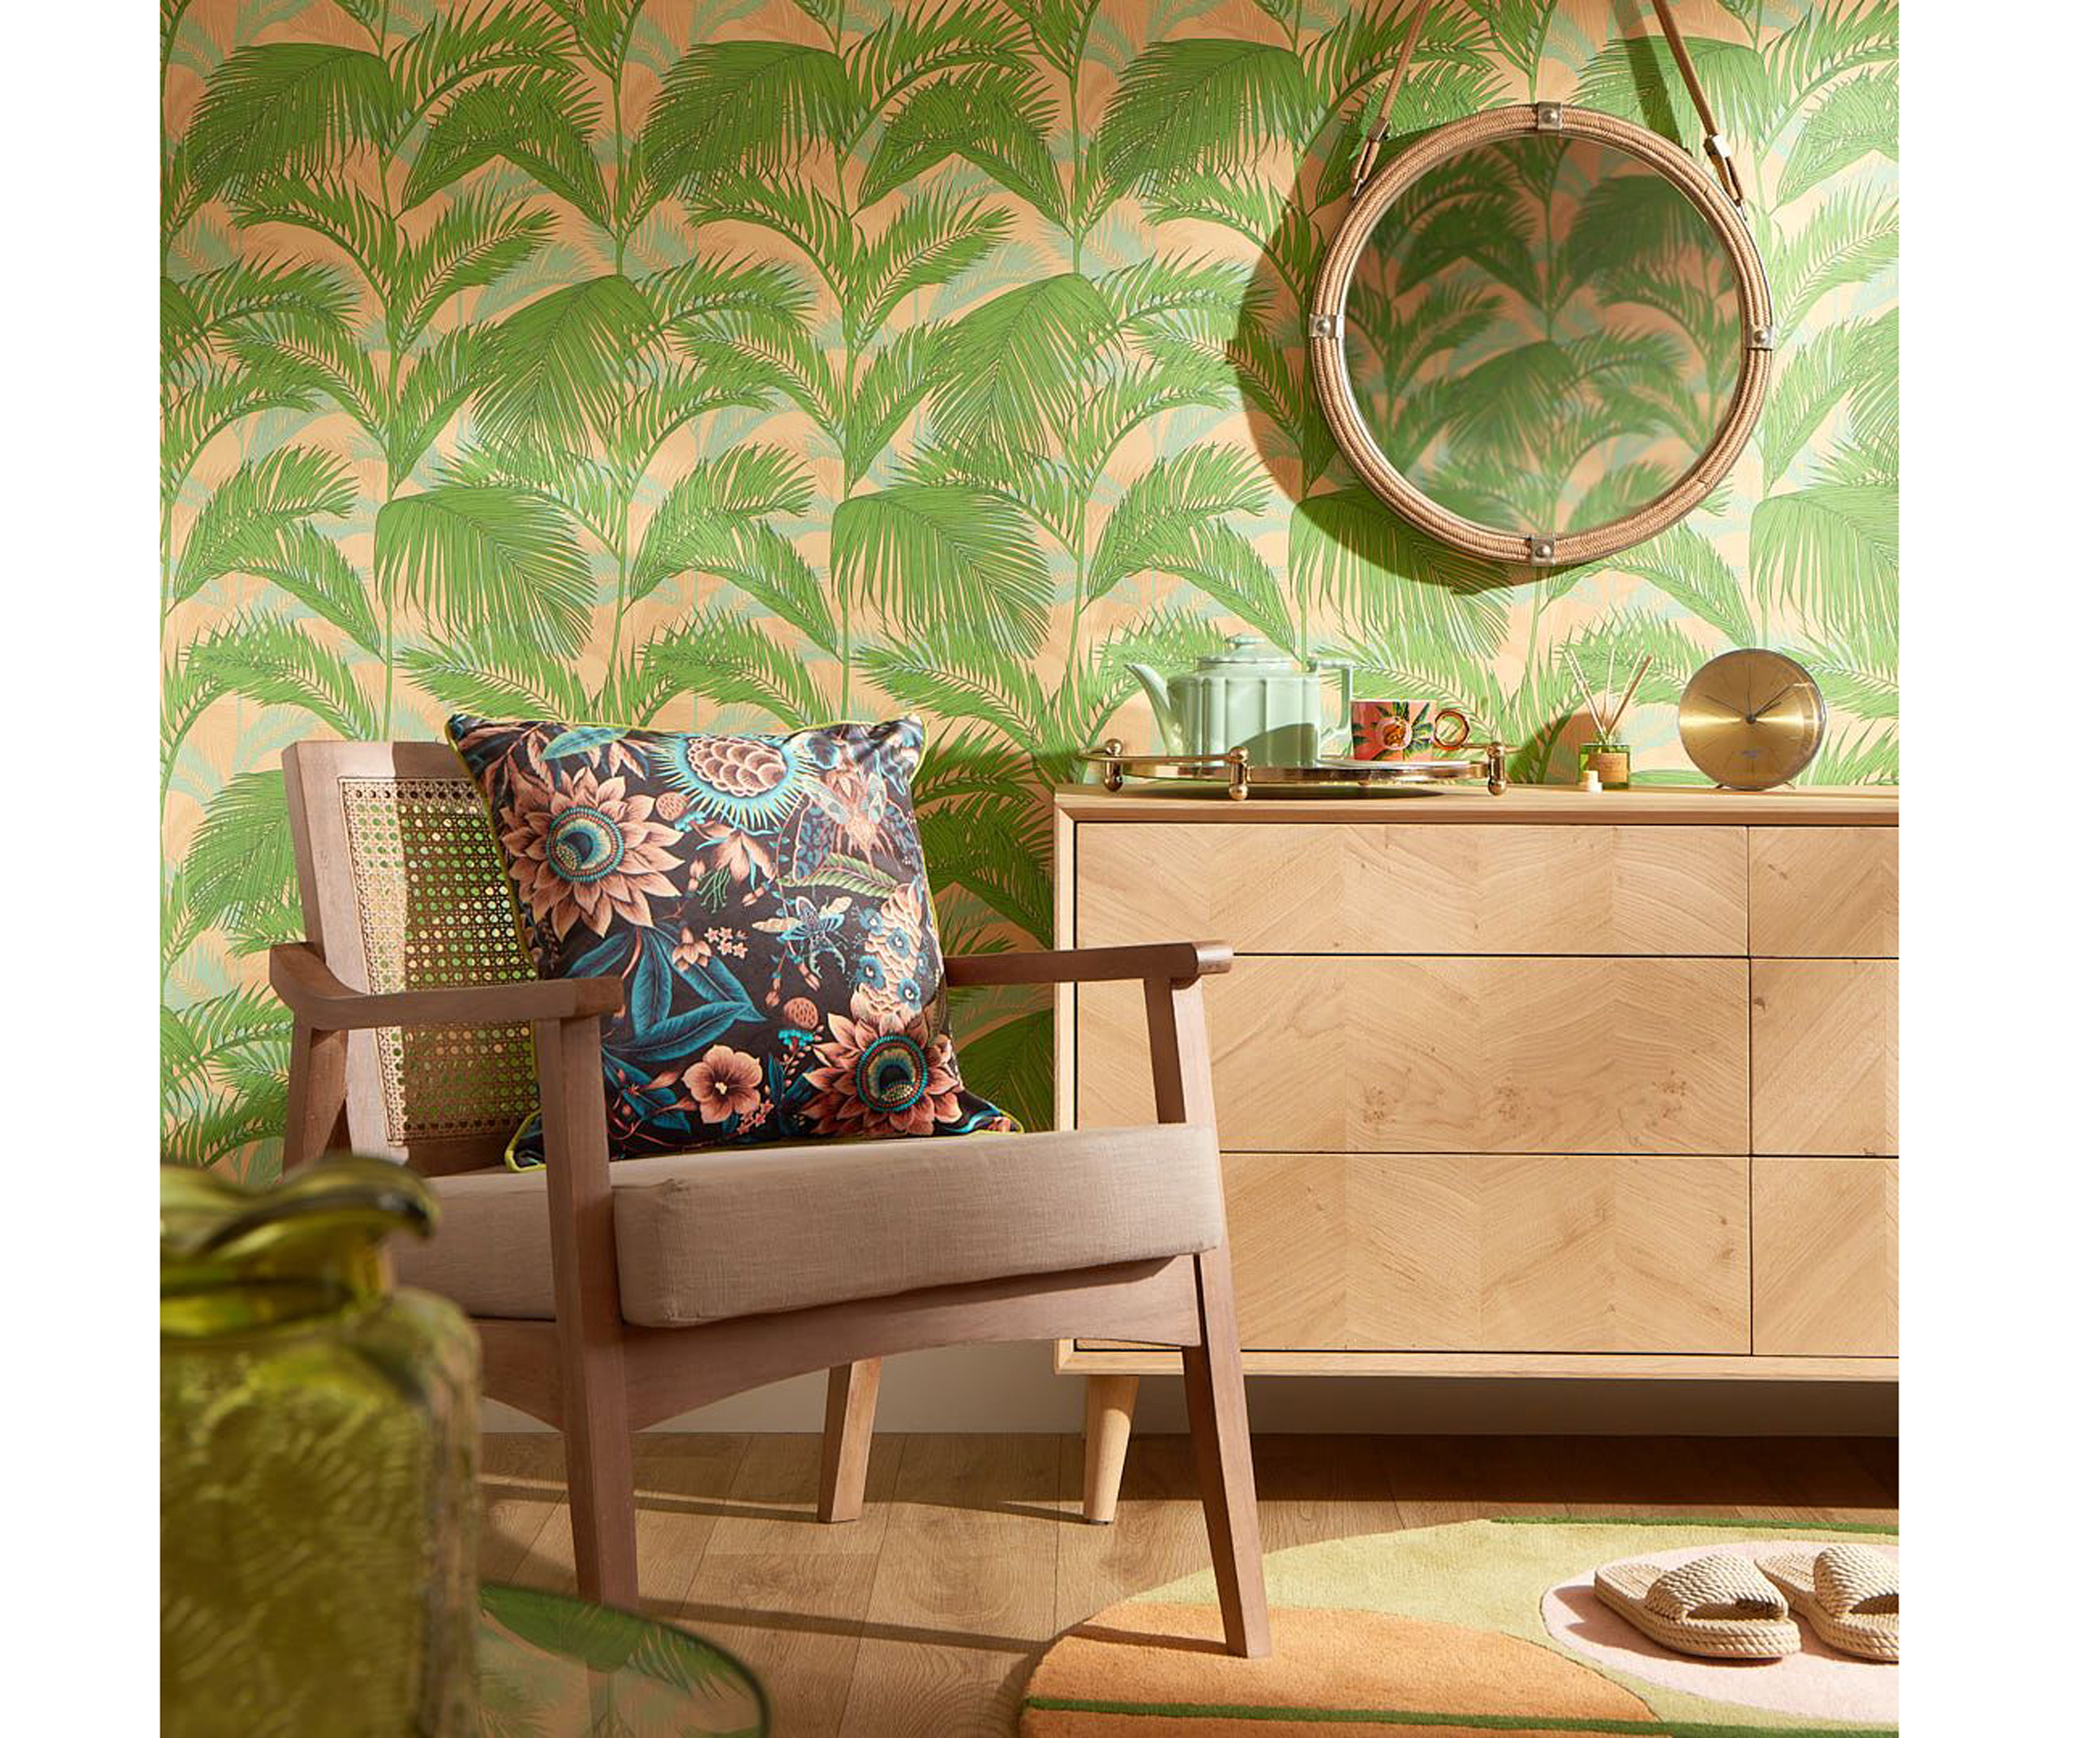 Lust Home Miami Vibe Wallpaper in Grass Green and Peach, £45, Lust Home